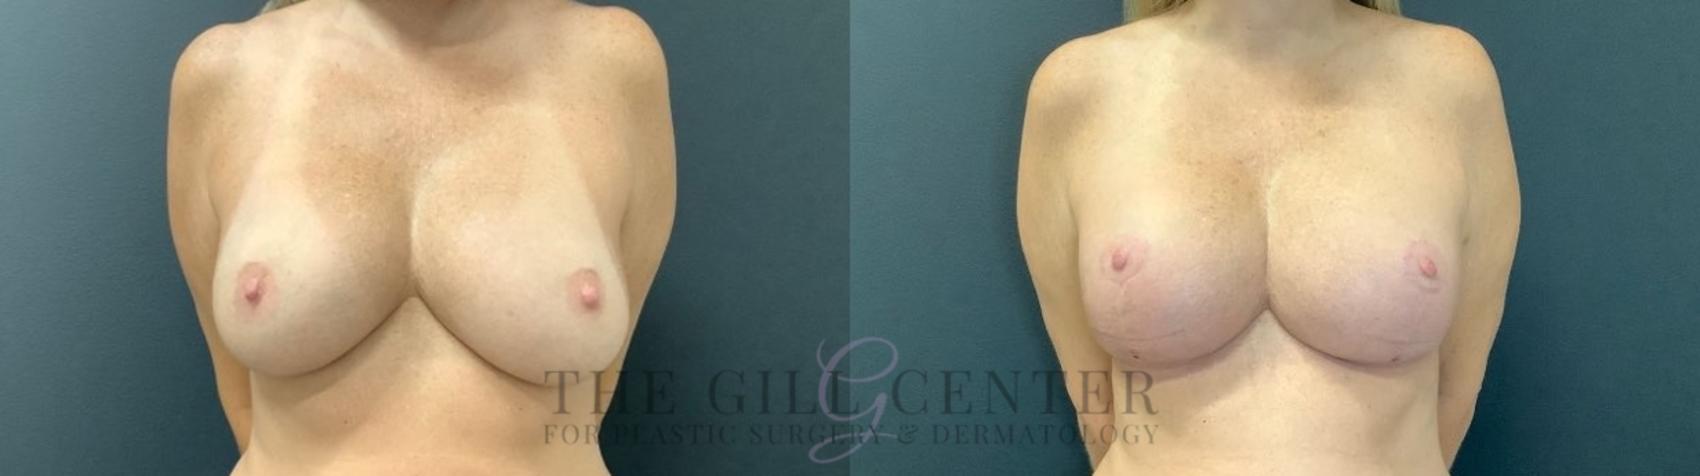 Breast Revisions Case 473 Before & After Front | The Woodlands, TX | The Gill Center for Plastic Surgery and Dermatology